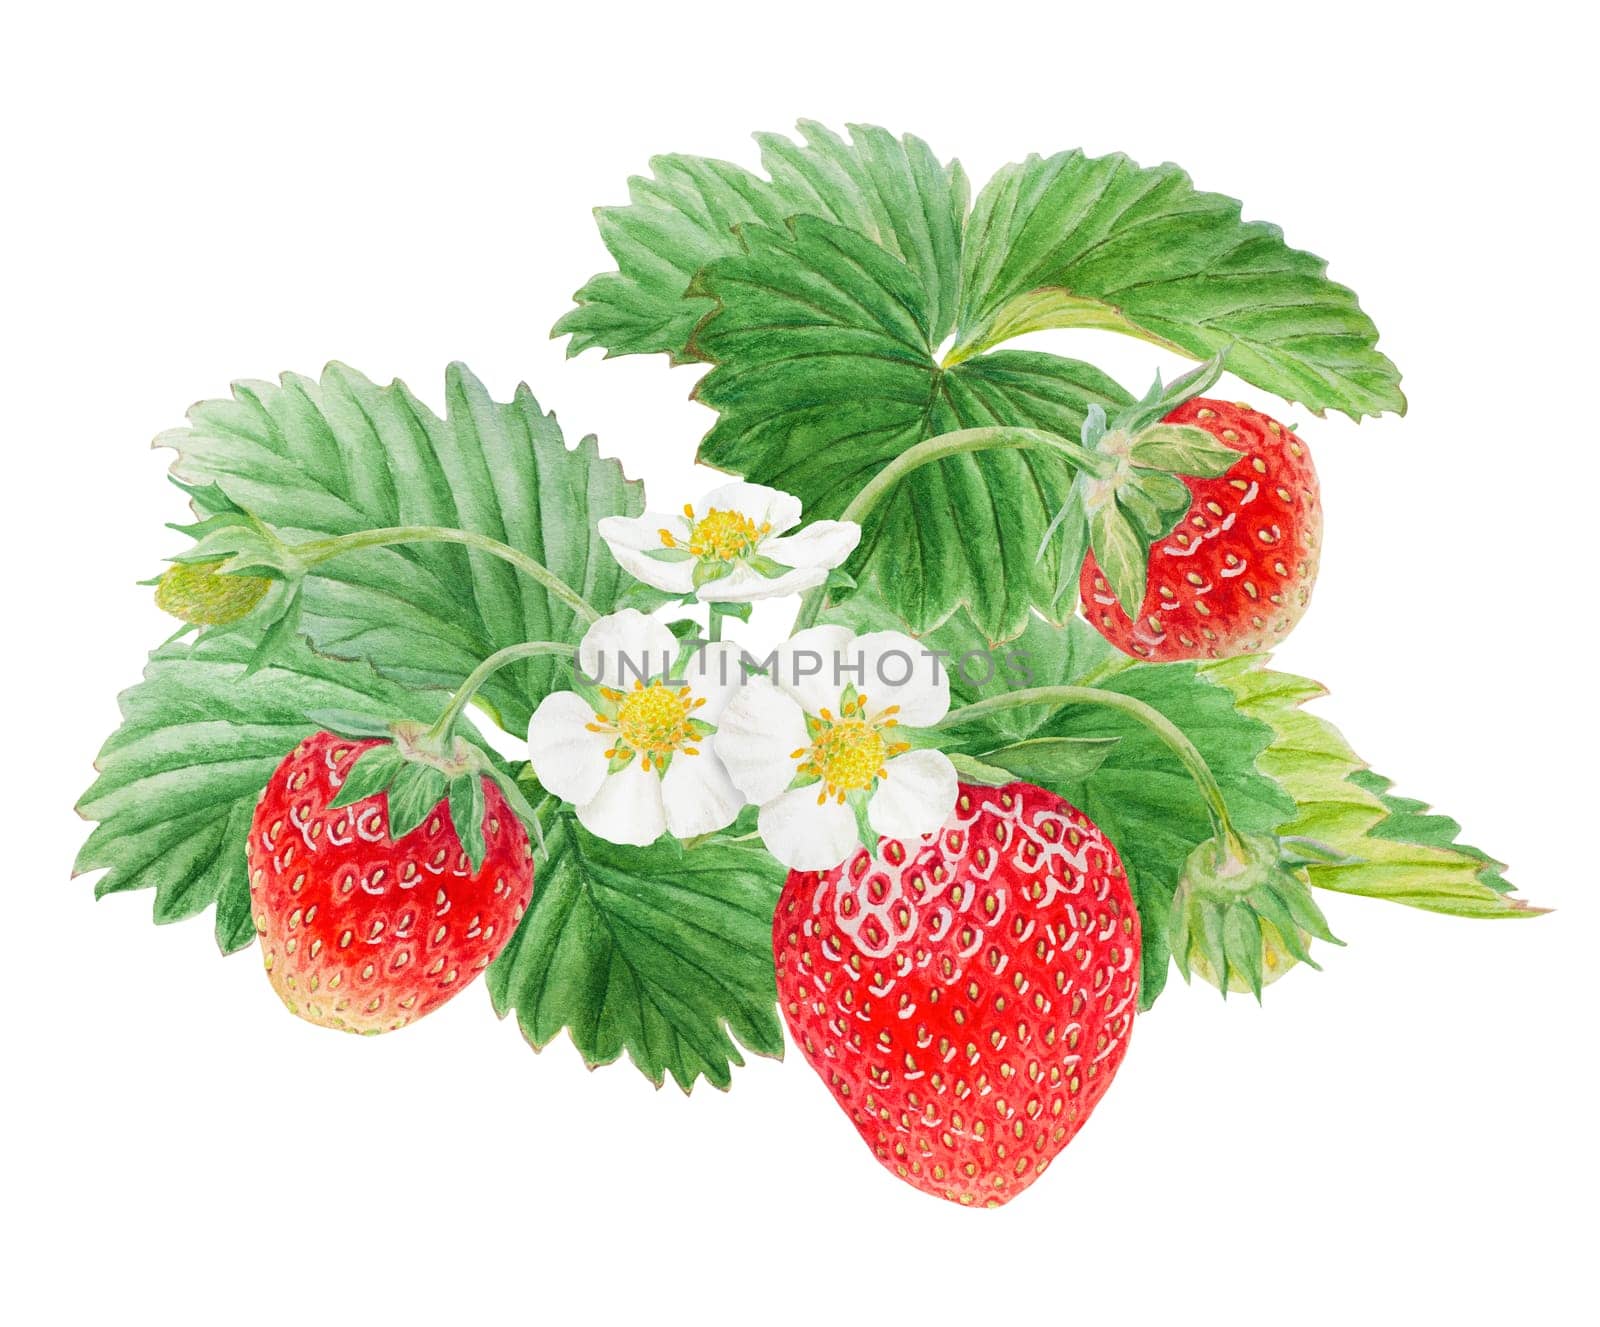 Red strawberry hand drawn watercolor illustration. Delicious food art, fresh botanical realistic painting. Summer sweet berry clip art for restaurant, cafe menu, packaging of farm goods, vegan products